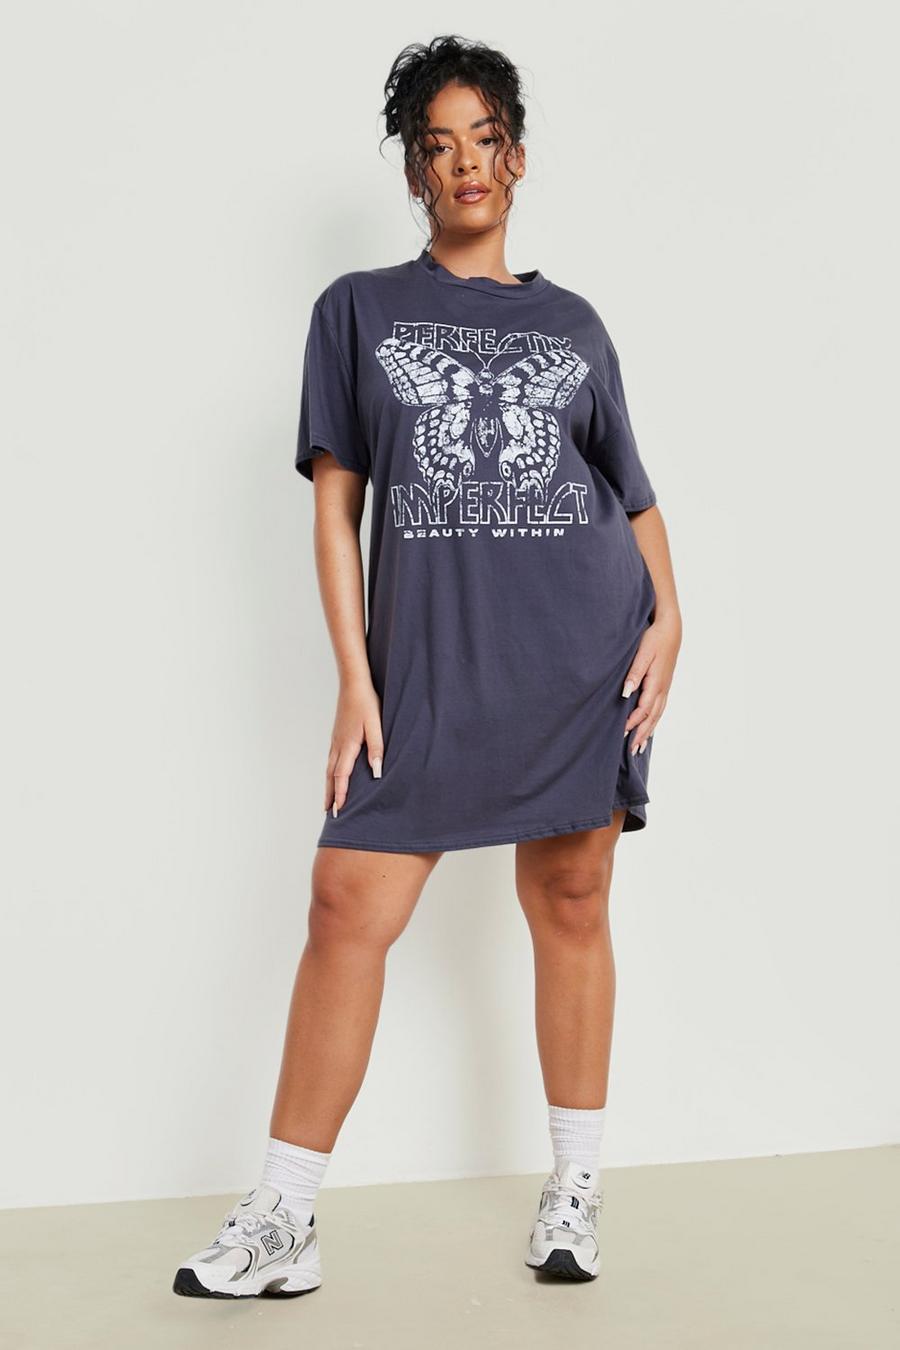 Vestito T-shirt Plus Size con slogan Perfectly Imperfect, Charcoal gris